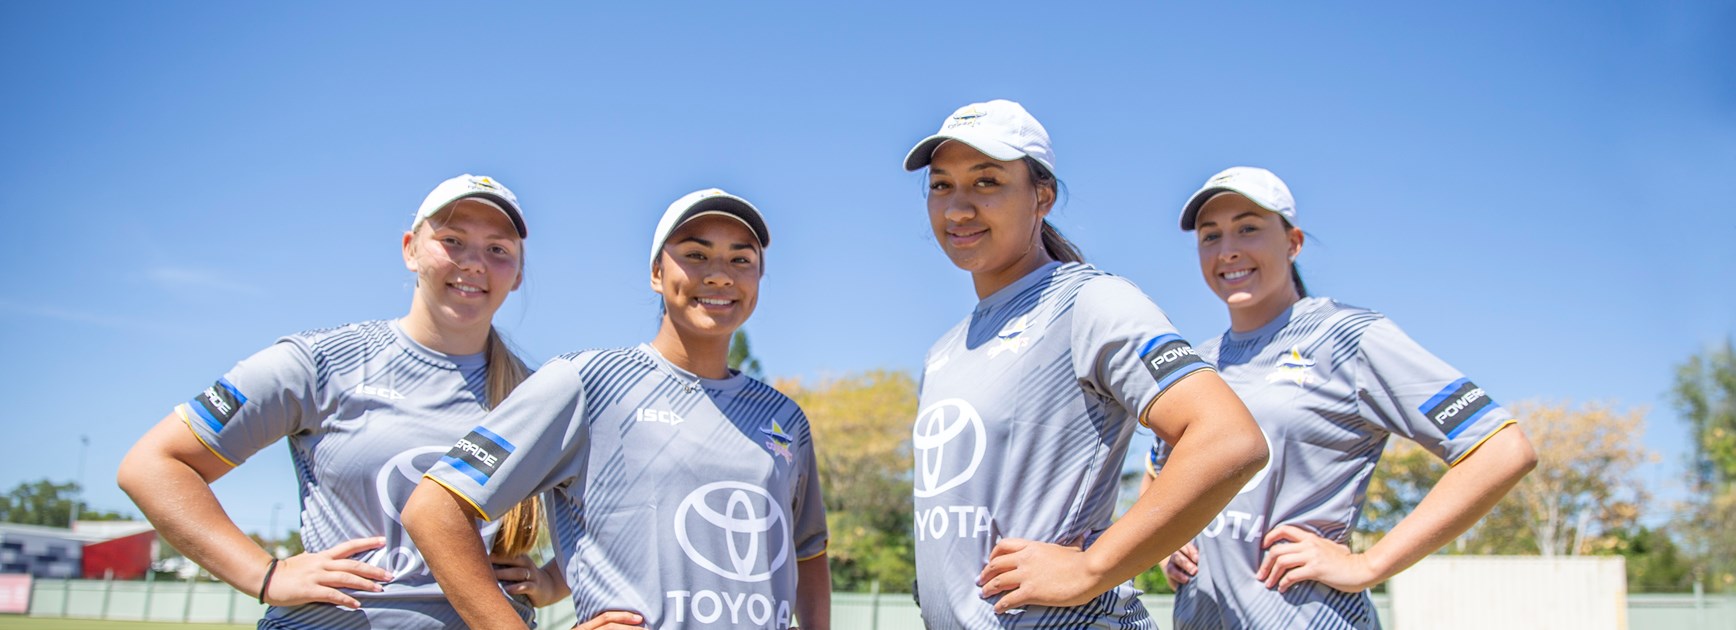 Cowboys NRLW in sight with new Women's Academy